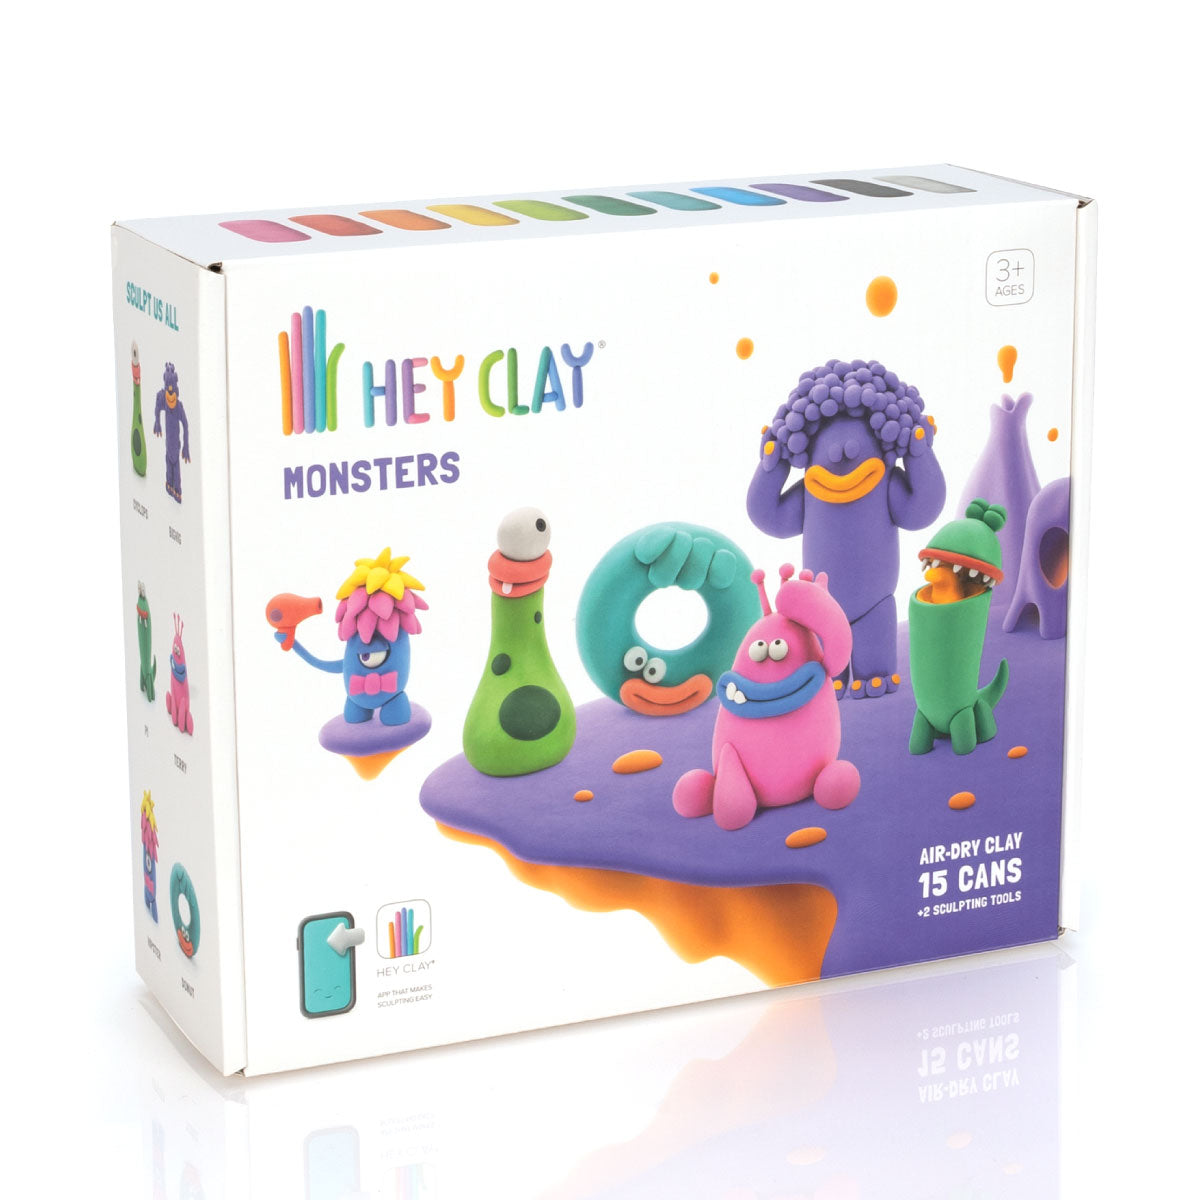 Hey Clay Monsters - 15 Air-Dry Modeling Clays